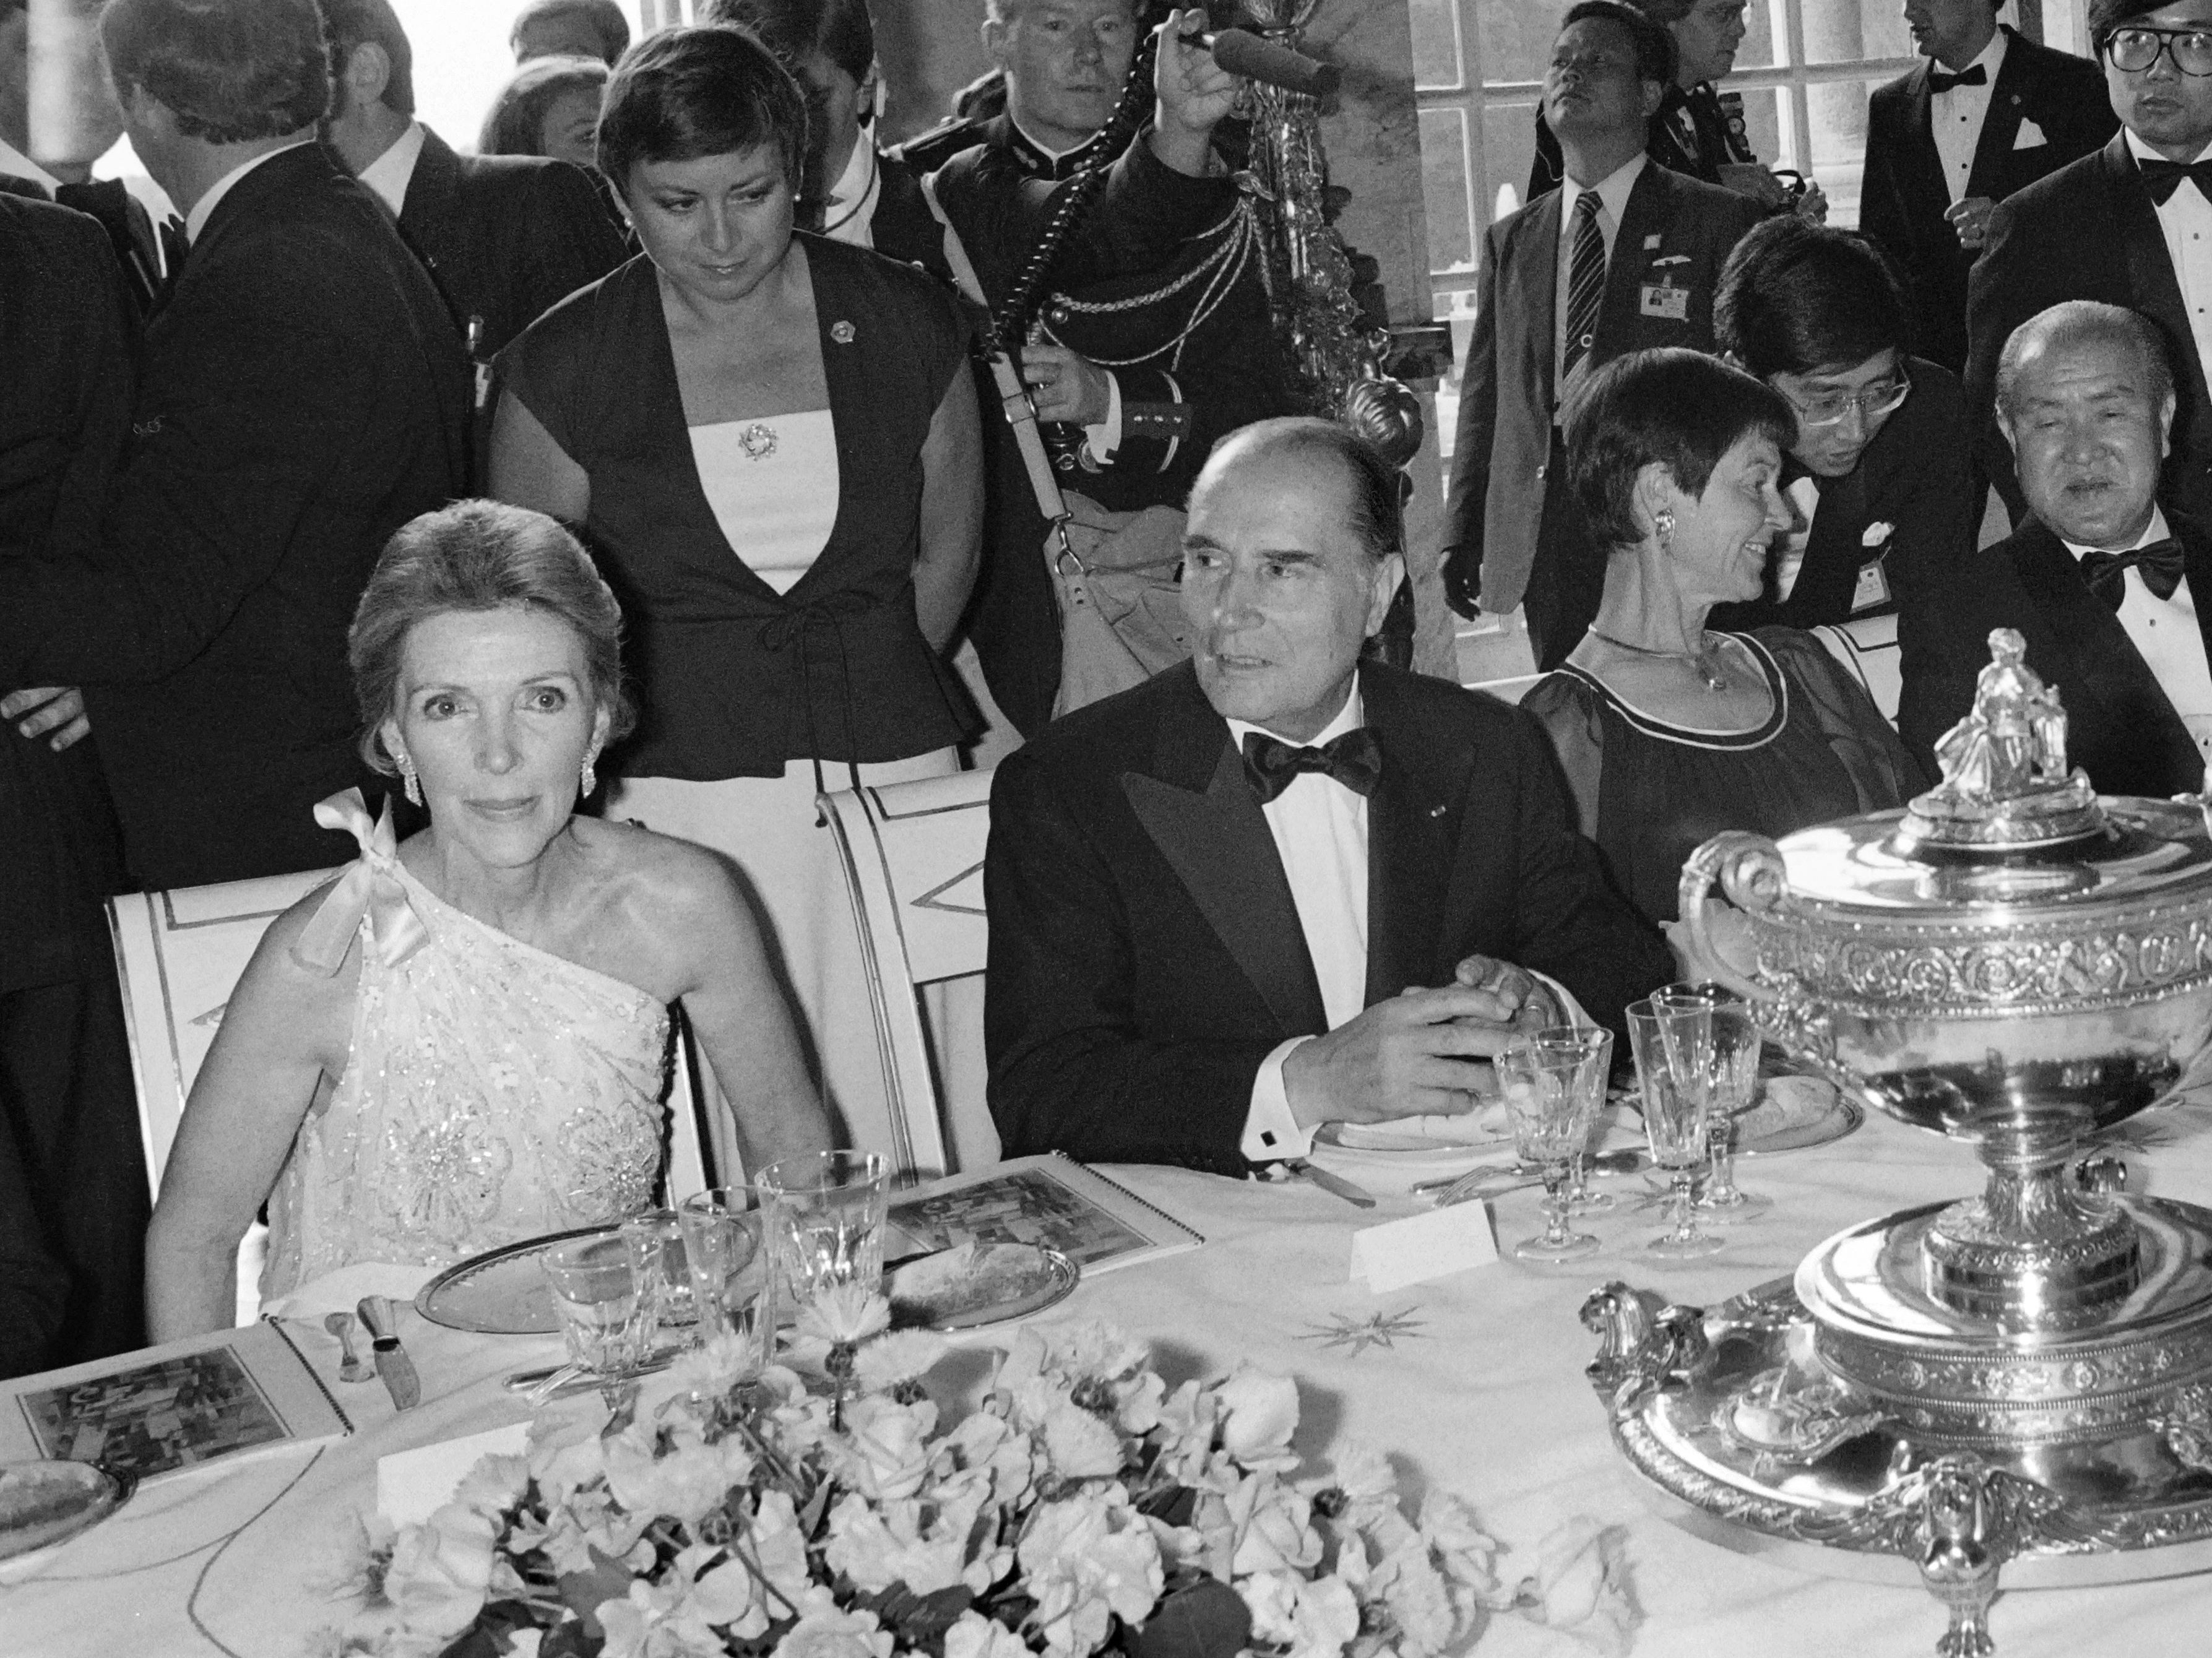 Nancy Reagan, former first lady, attends an official dinner during the 1982 G8 Summit